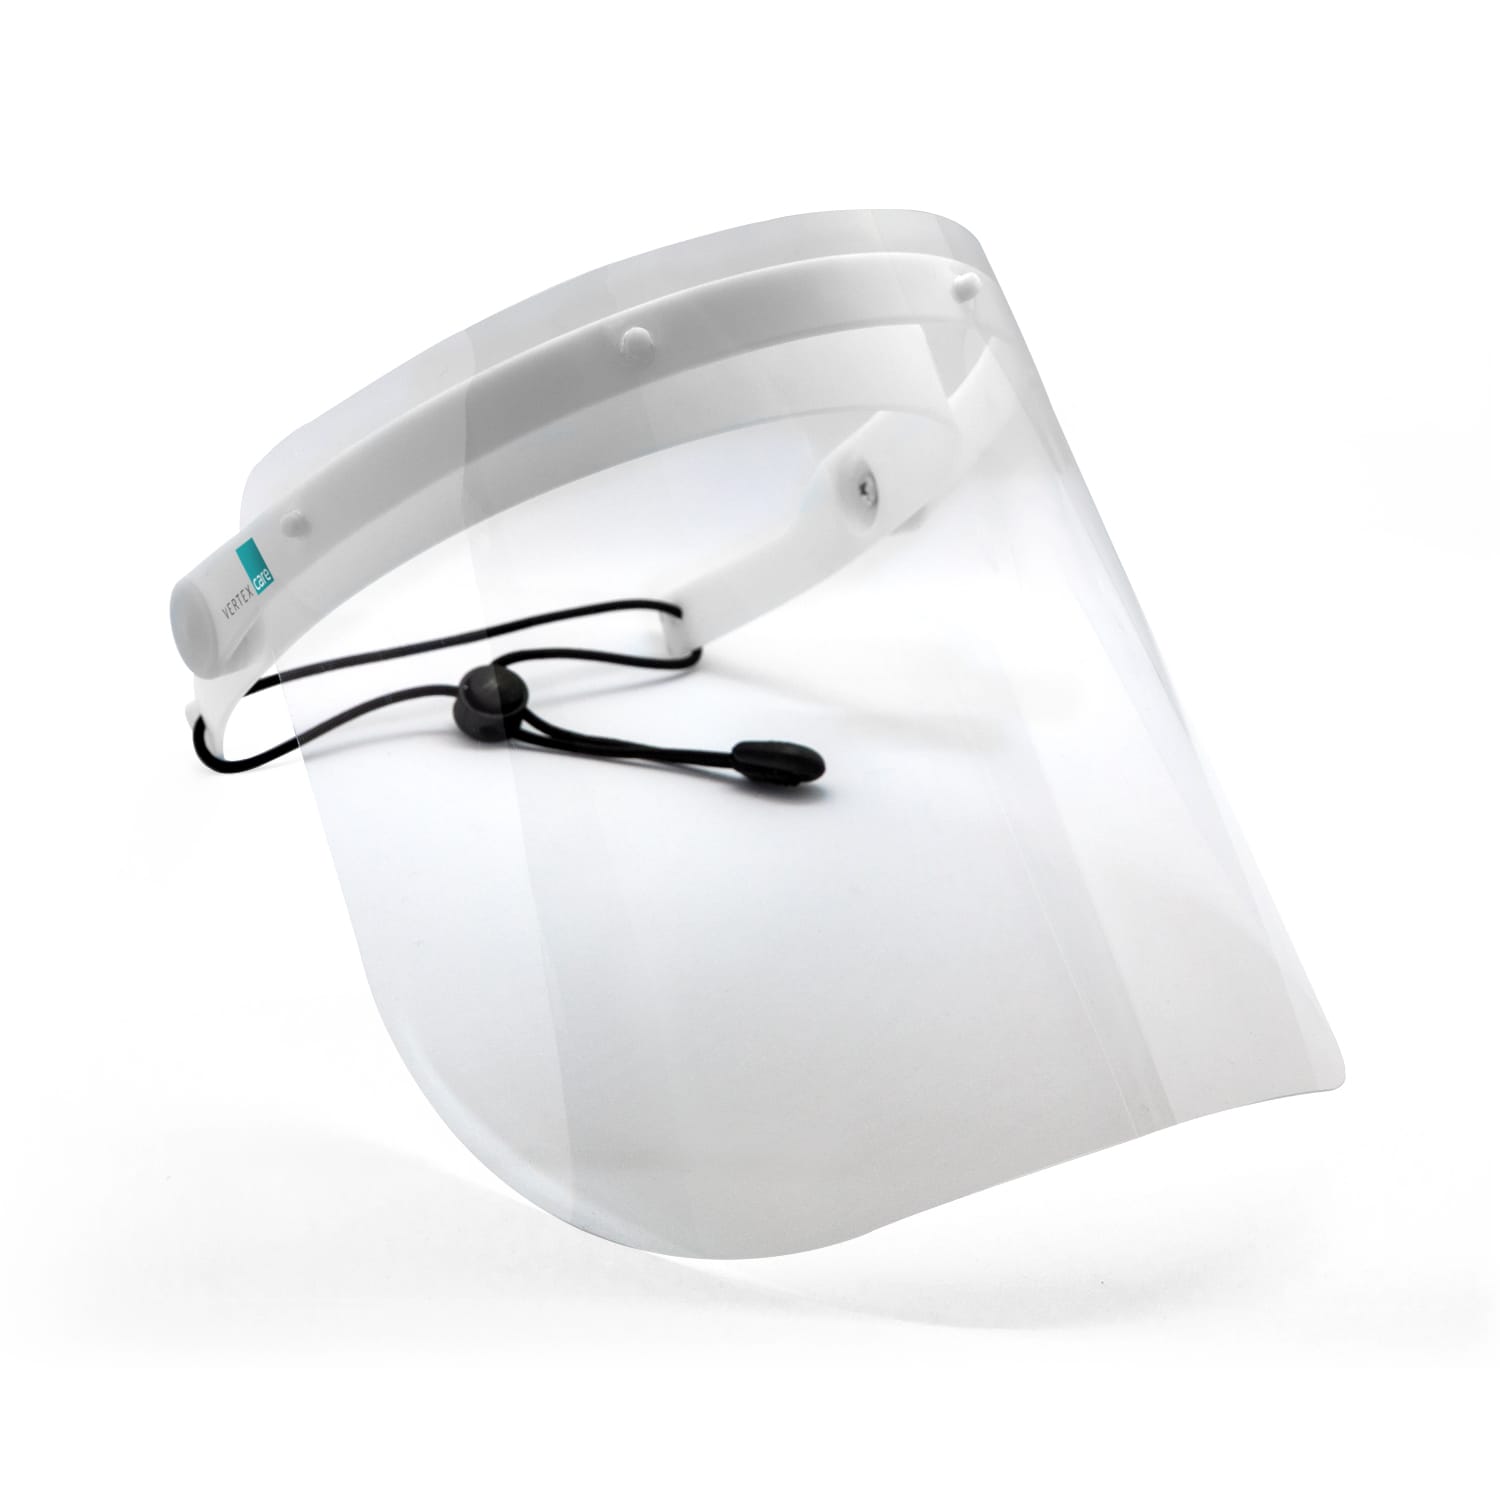 Multifunctional face protector with 10 replaceable full visors